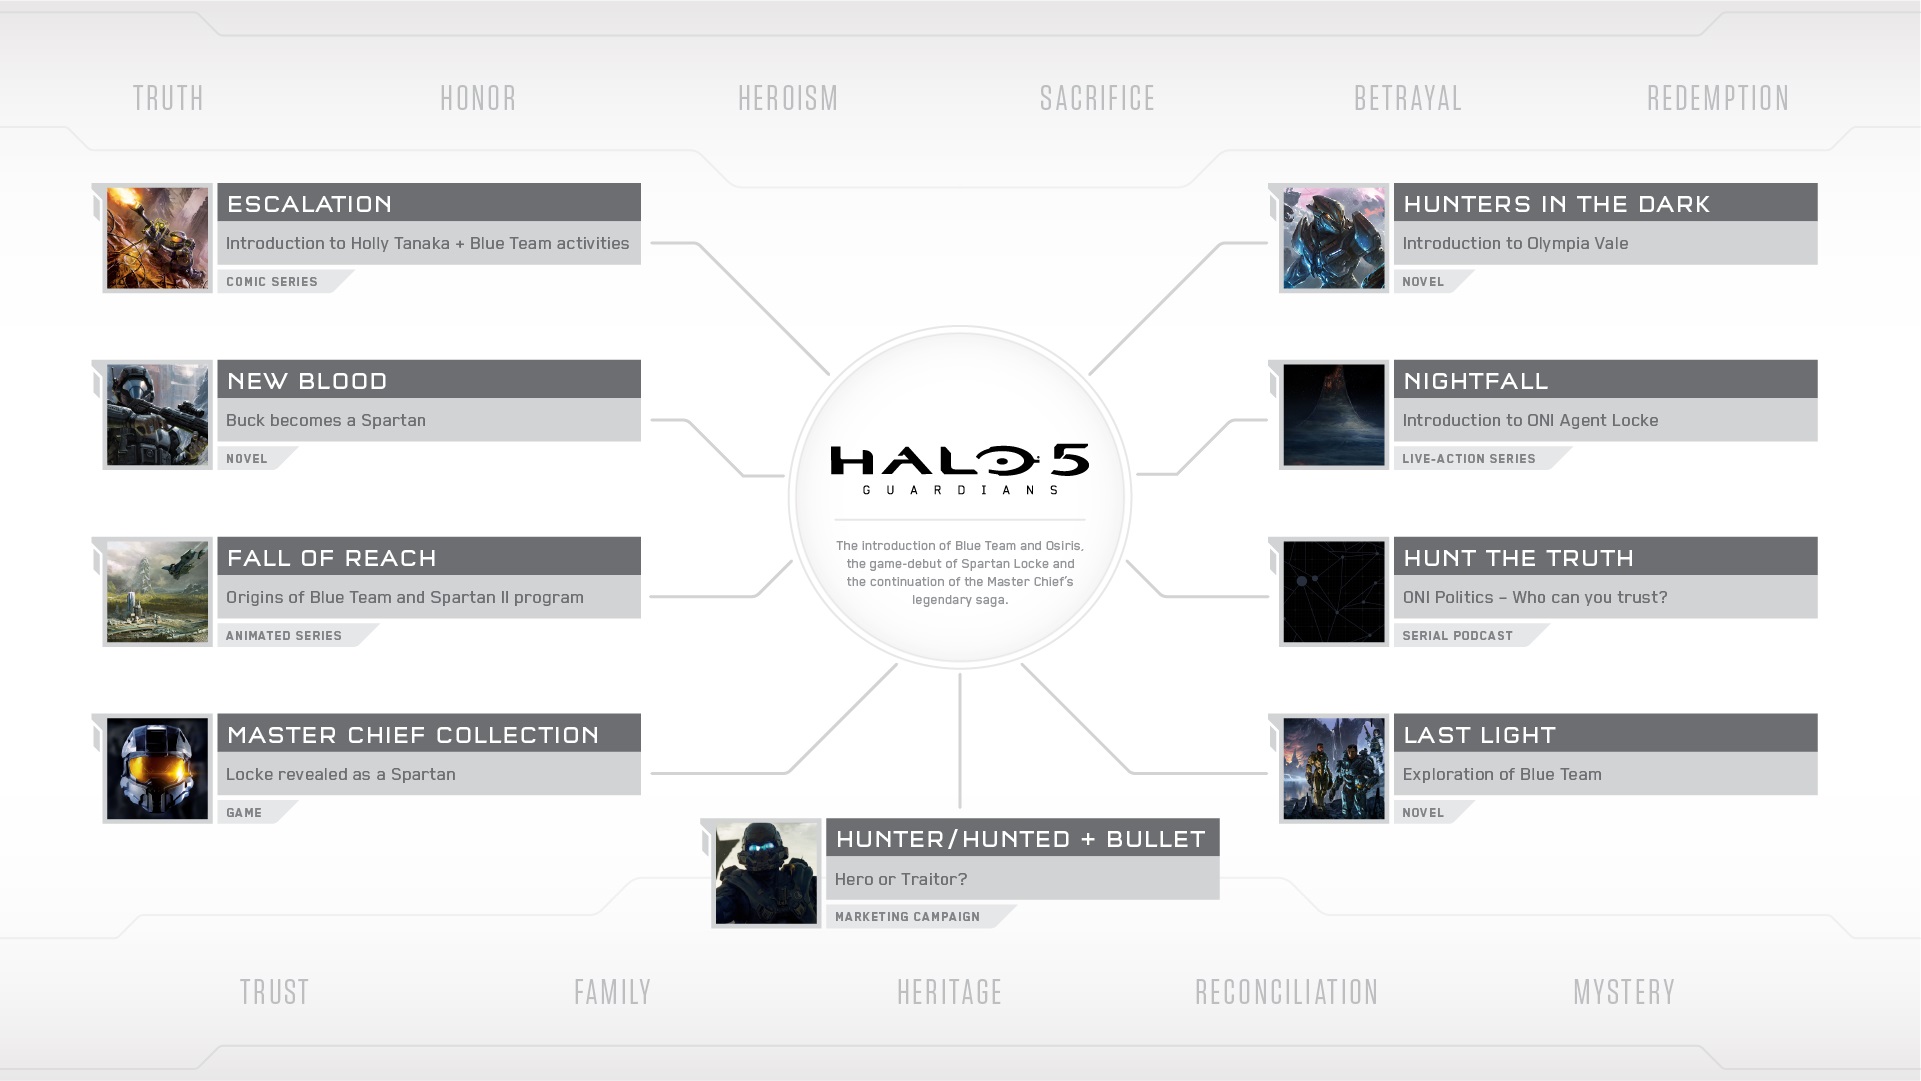 Video For 343 Industries Reveals New Halo 5: Guardians Story Details at San Diego Comic-Con